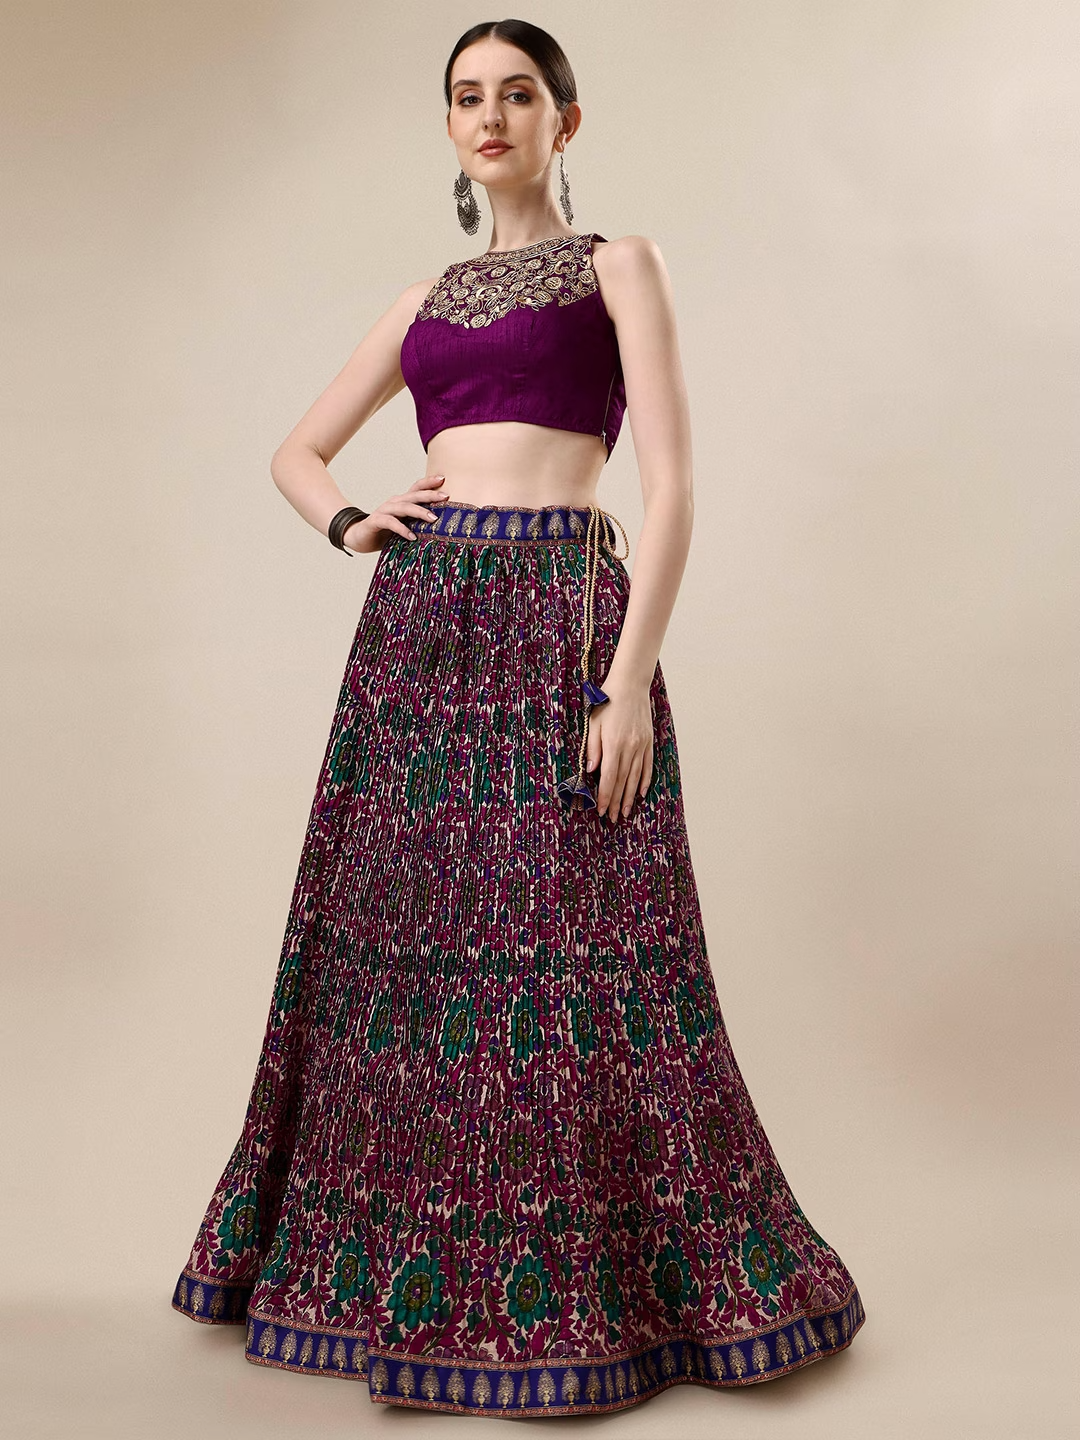 Floral Printed Ready to Wear Lehenga & Blouse With Dupatta